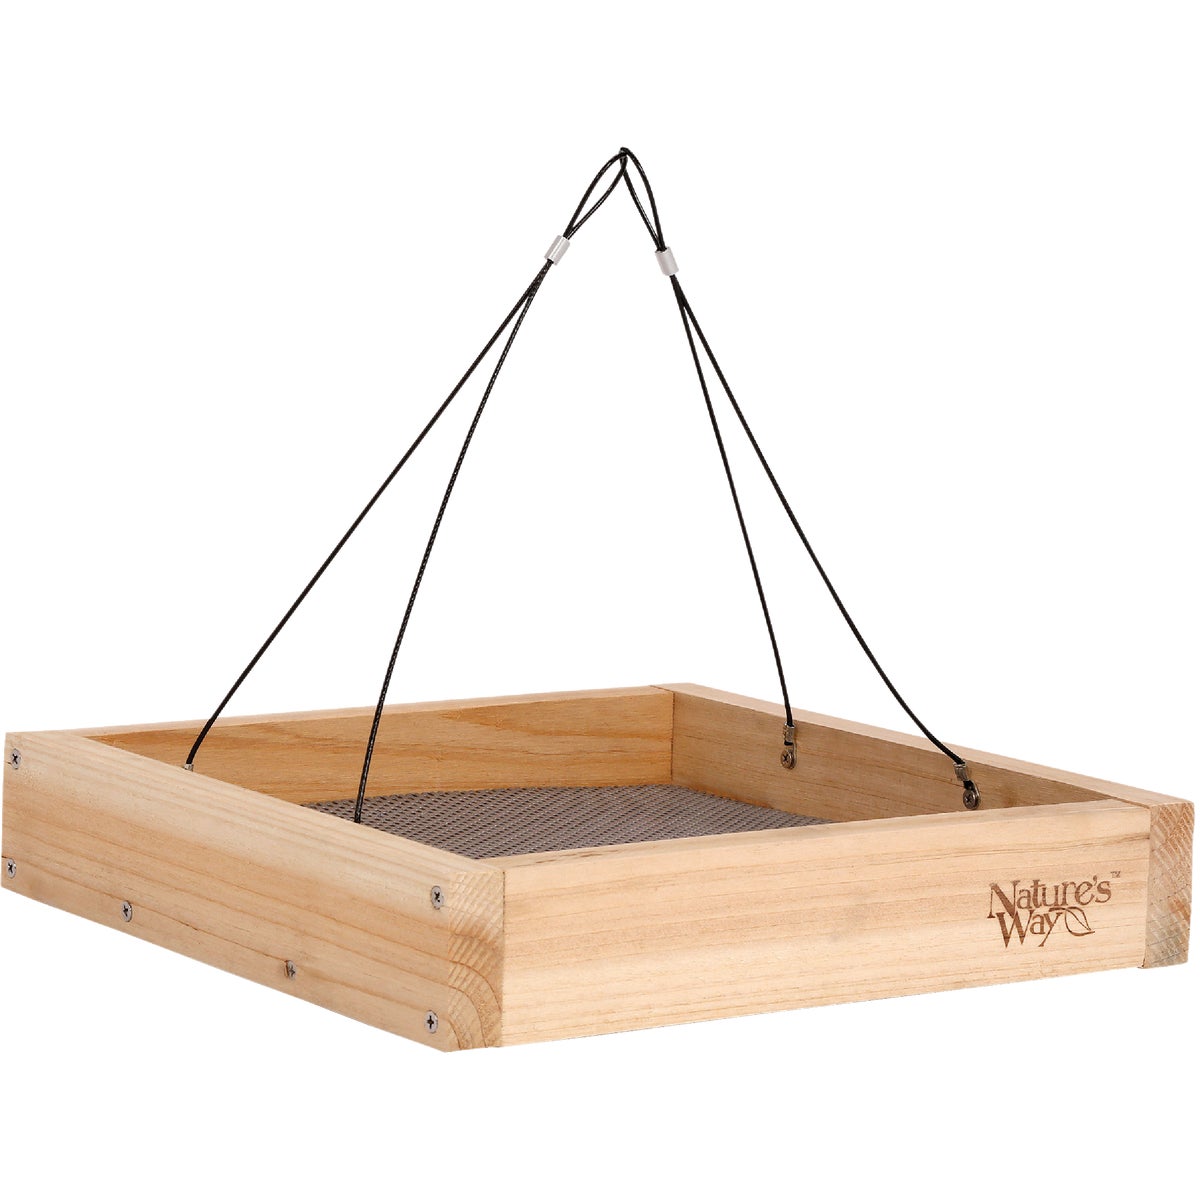 Item 704602, Hanging platform bird feeder is made with insect and rot resistant premium 